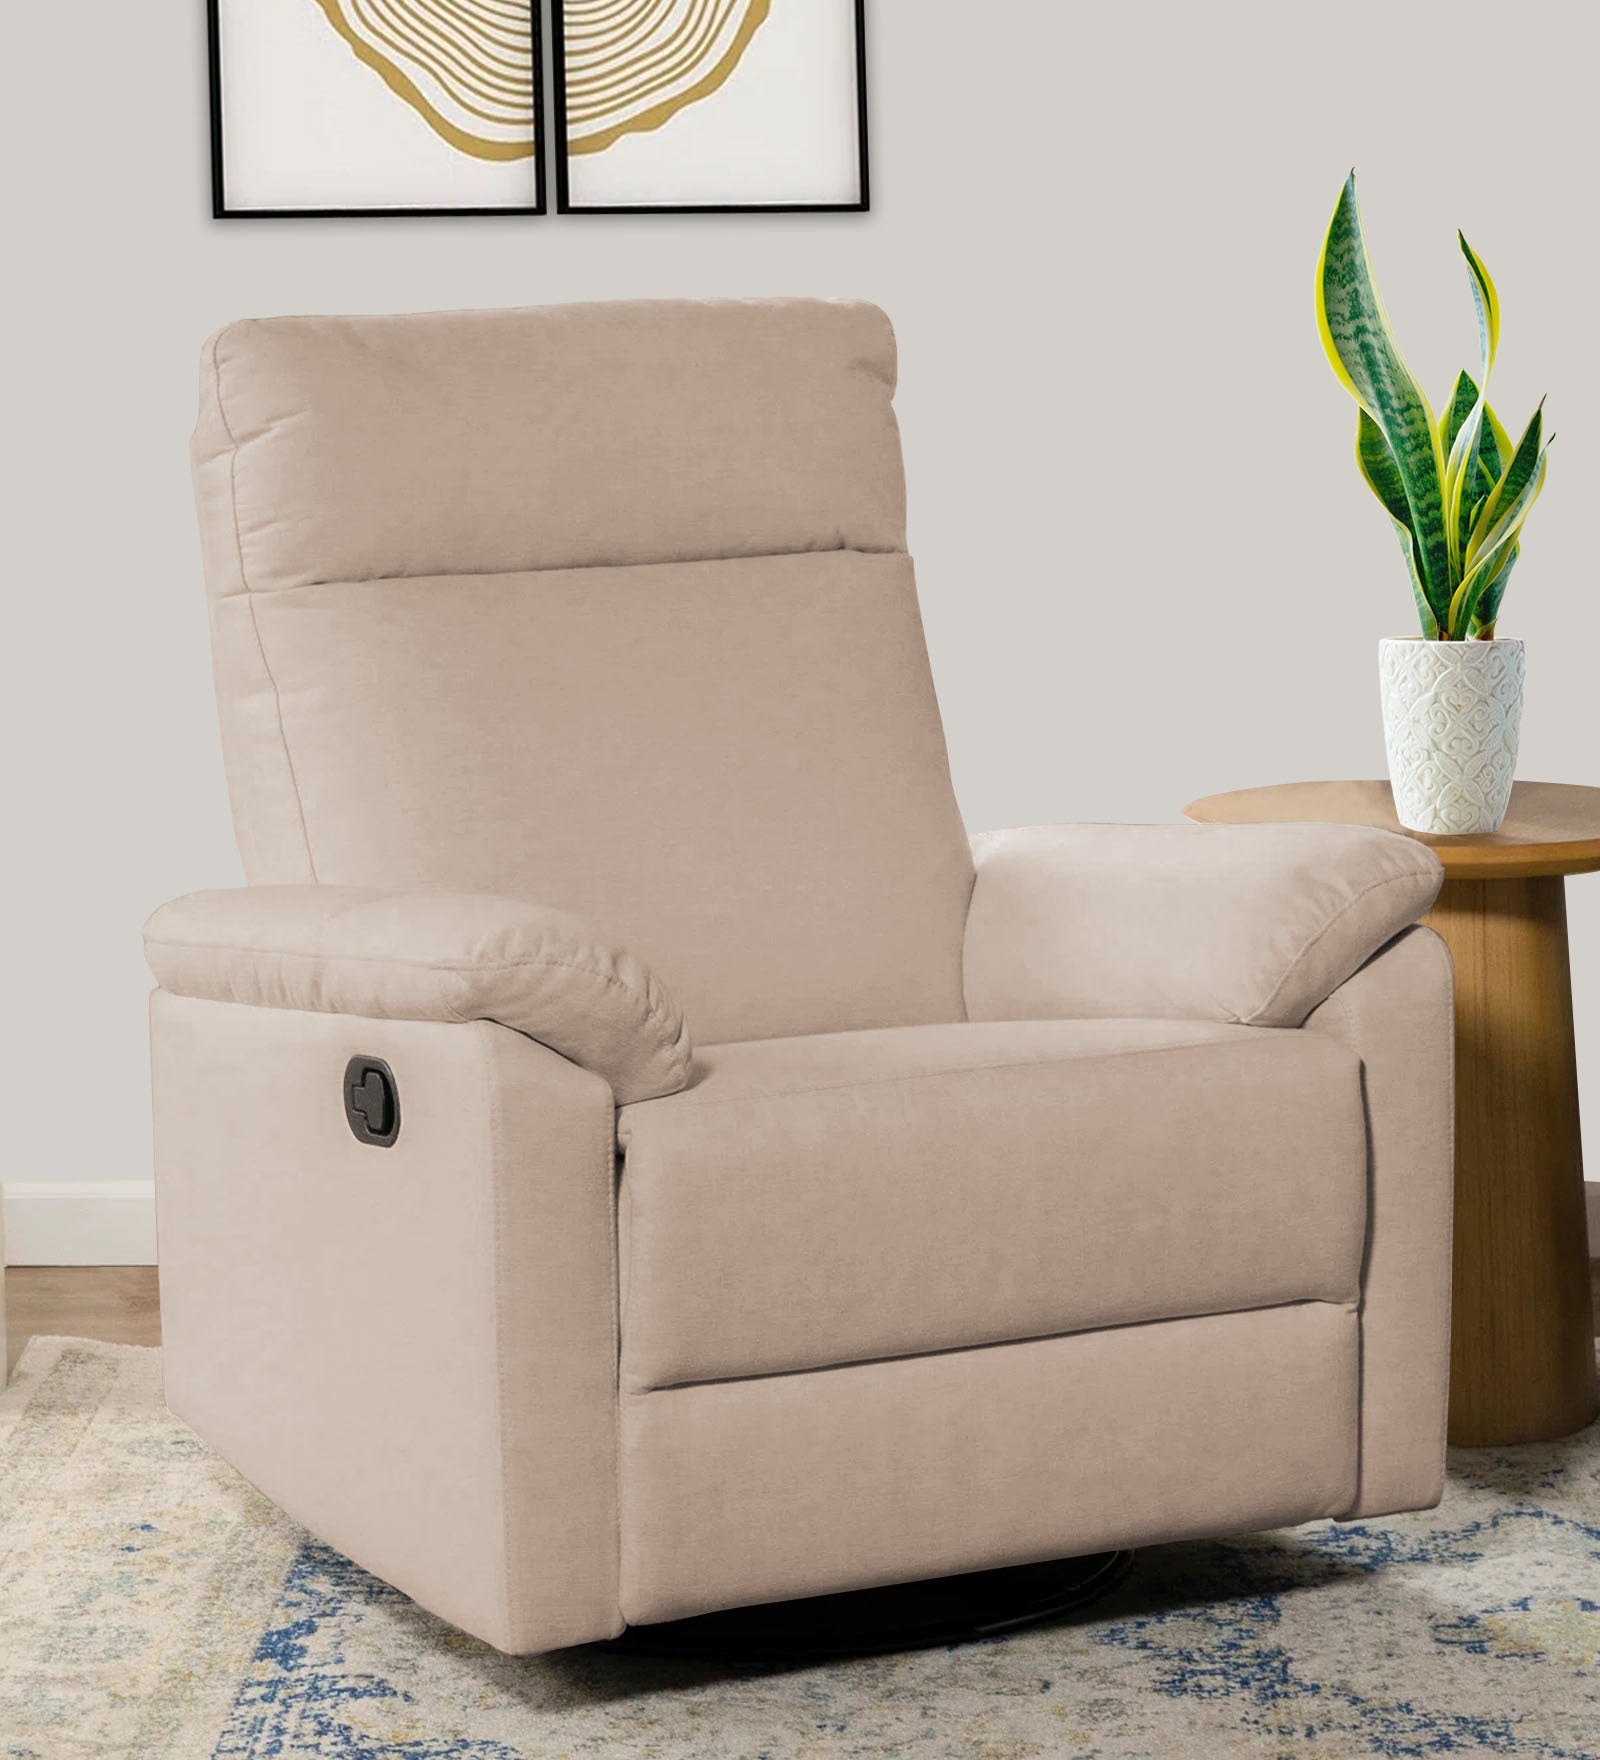 Mandy Fabric Manual 1 Seater Recliner In Camel Beige Colour